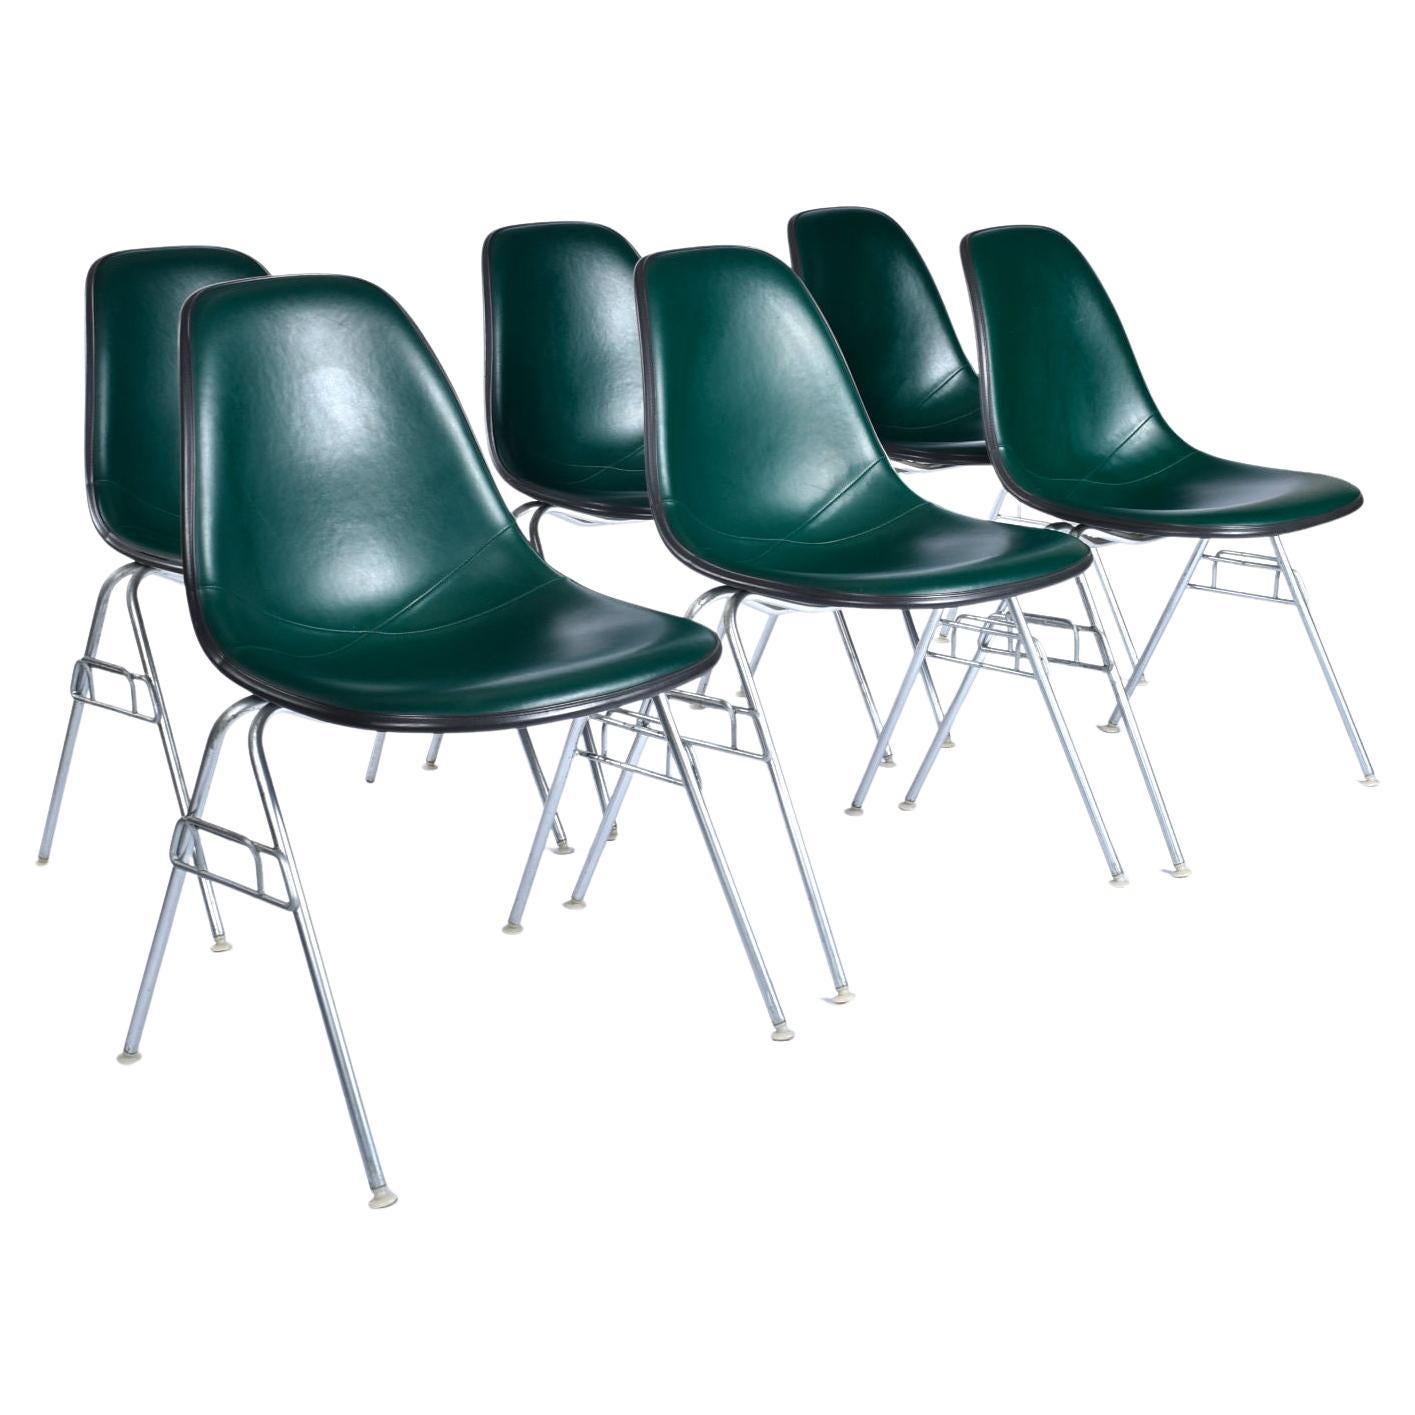 Sold as a group of six

Eames stackable fiberglass shell chairs with original green pads. The famous Charles and Ray Eames fiberglass shell chairs are outfitted with their original hunter green seat pads (cushions). Each chair bears the Herman